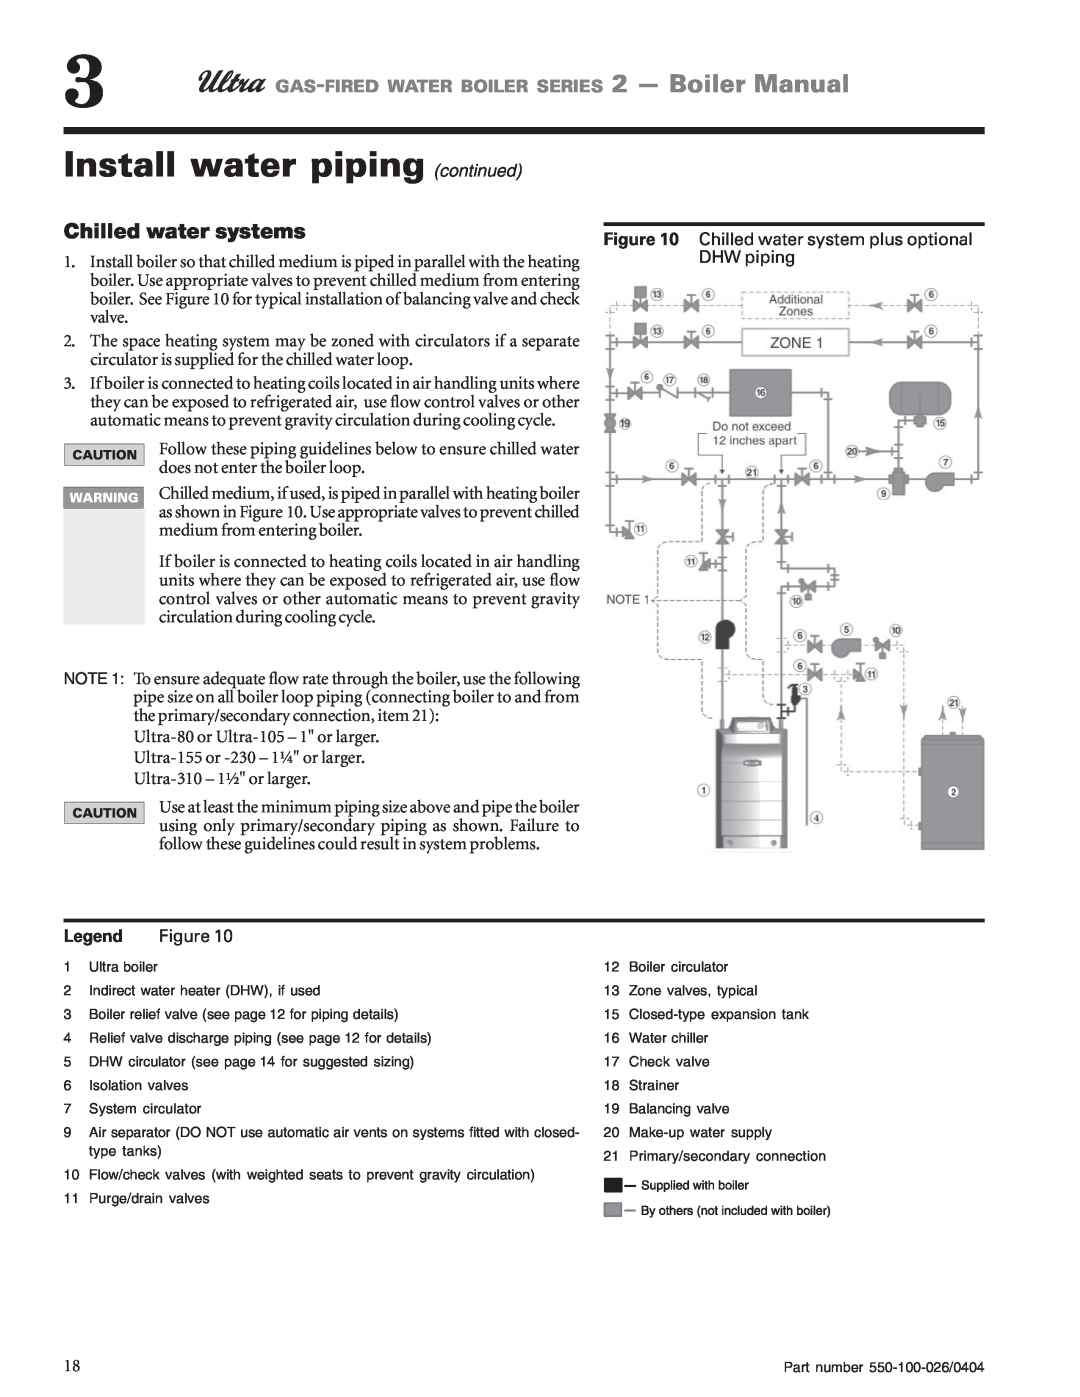 Ultra electronic 230 & -310, 105 Install water piping continued, Chilled water systems, Chilled water system plus optional 